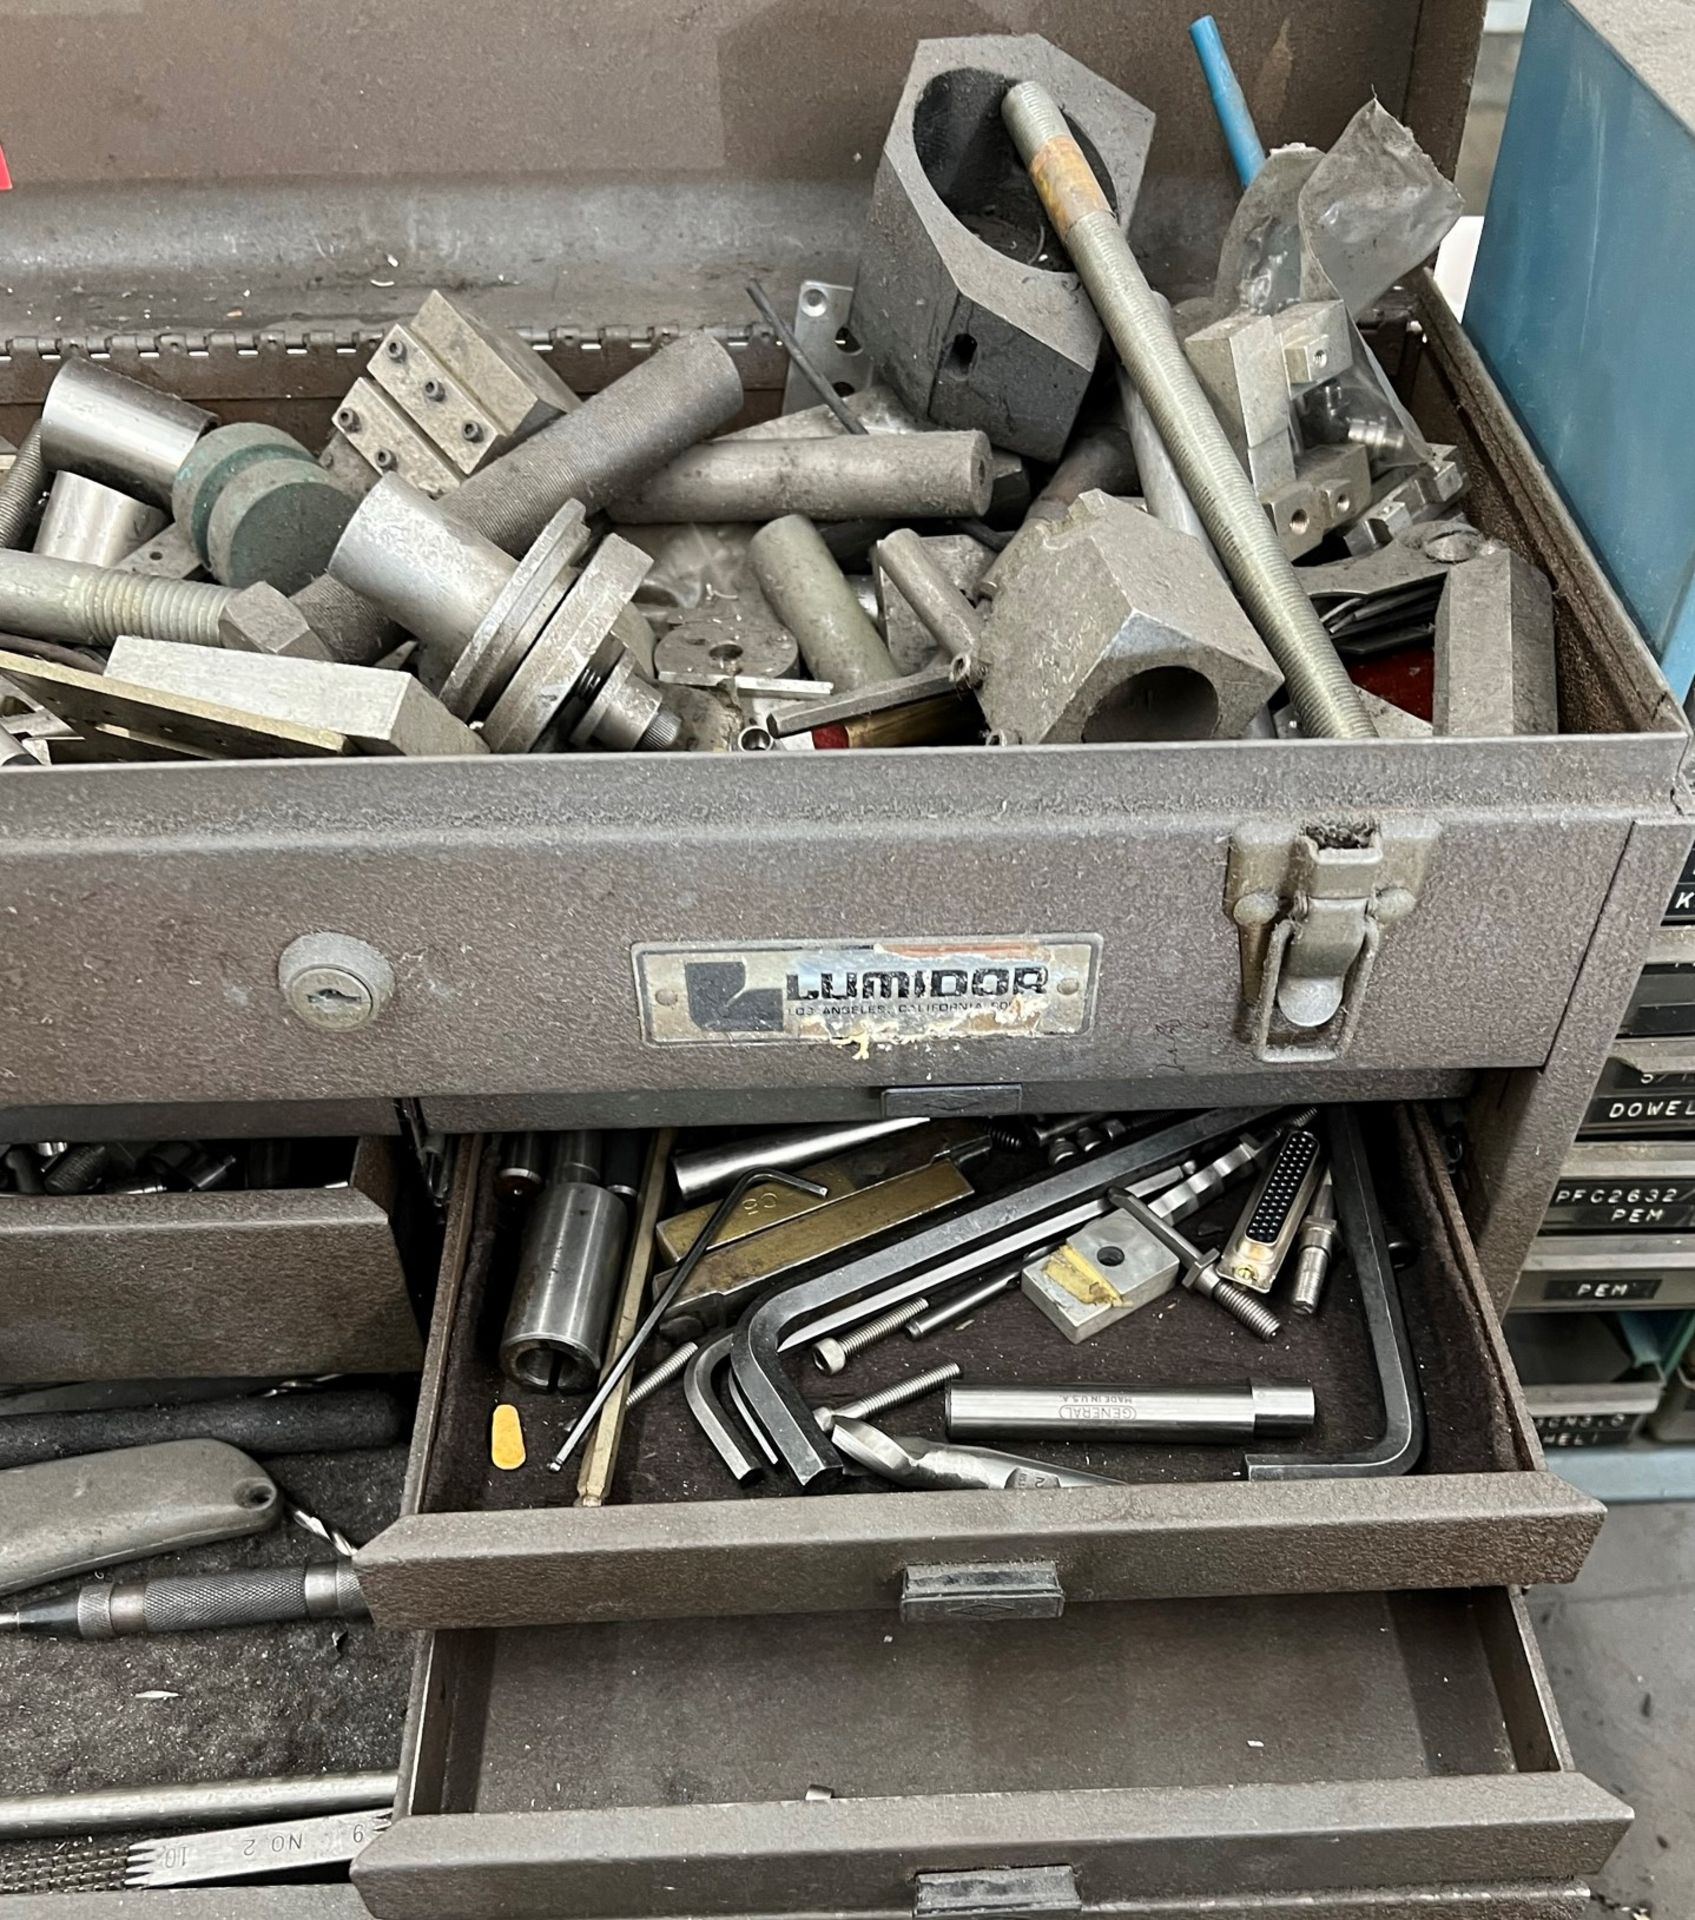 LUMIDOR BRAND KENNEDY-STYLE TOOL BOX, W/ MISC. CONTENTS - Image 5 of 5